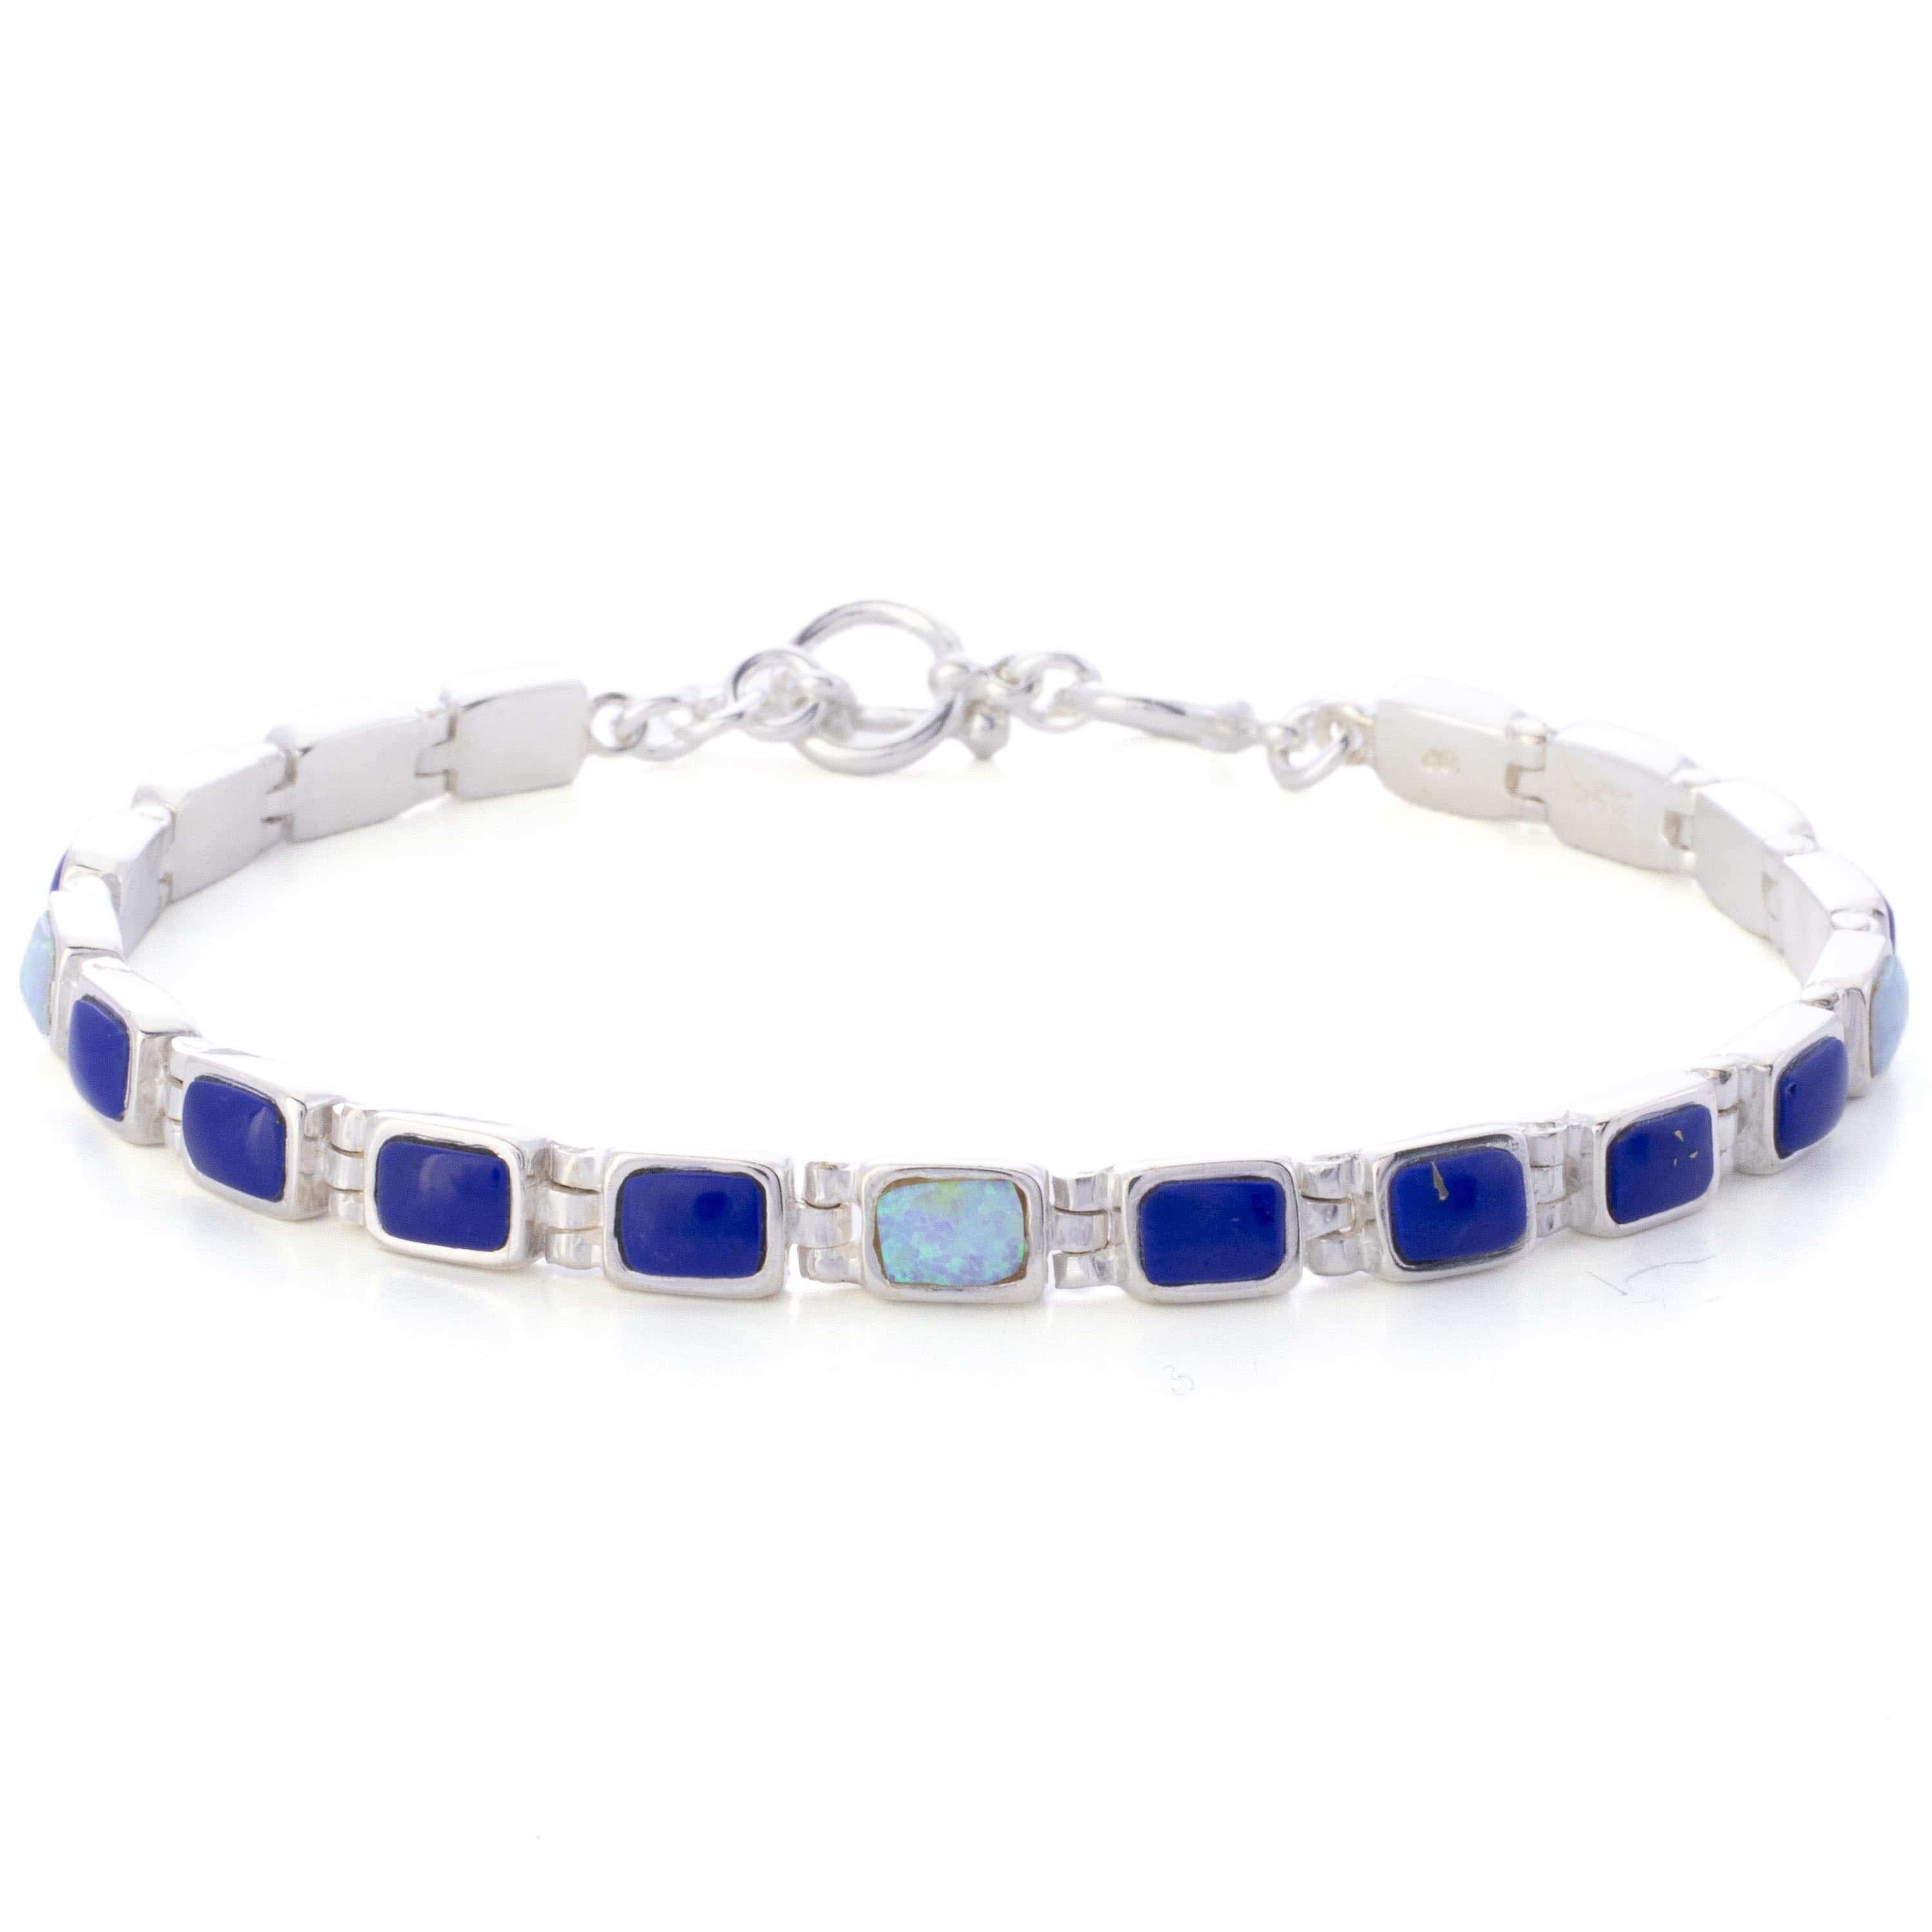 Kalifano Southwest Silver Jewelry Lapis 925 Sterling Silver Bracelet USA Handmade with Opal Accent NMB.0207.LP